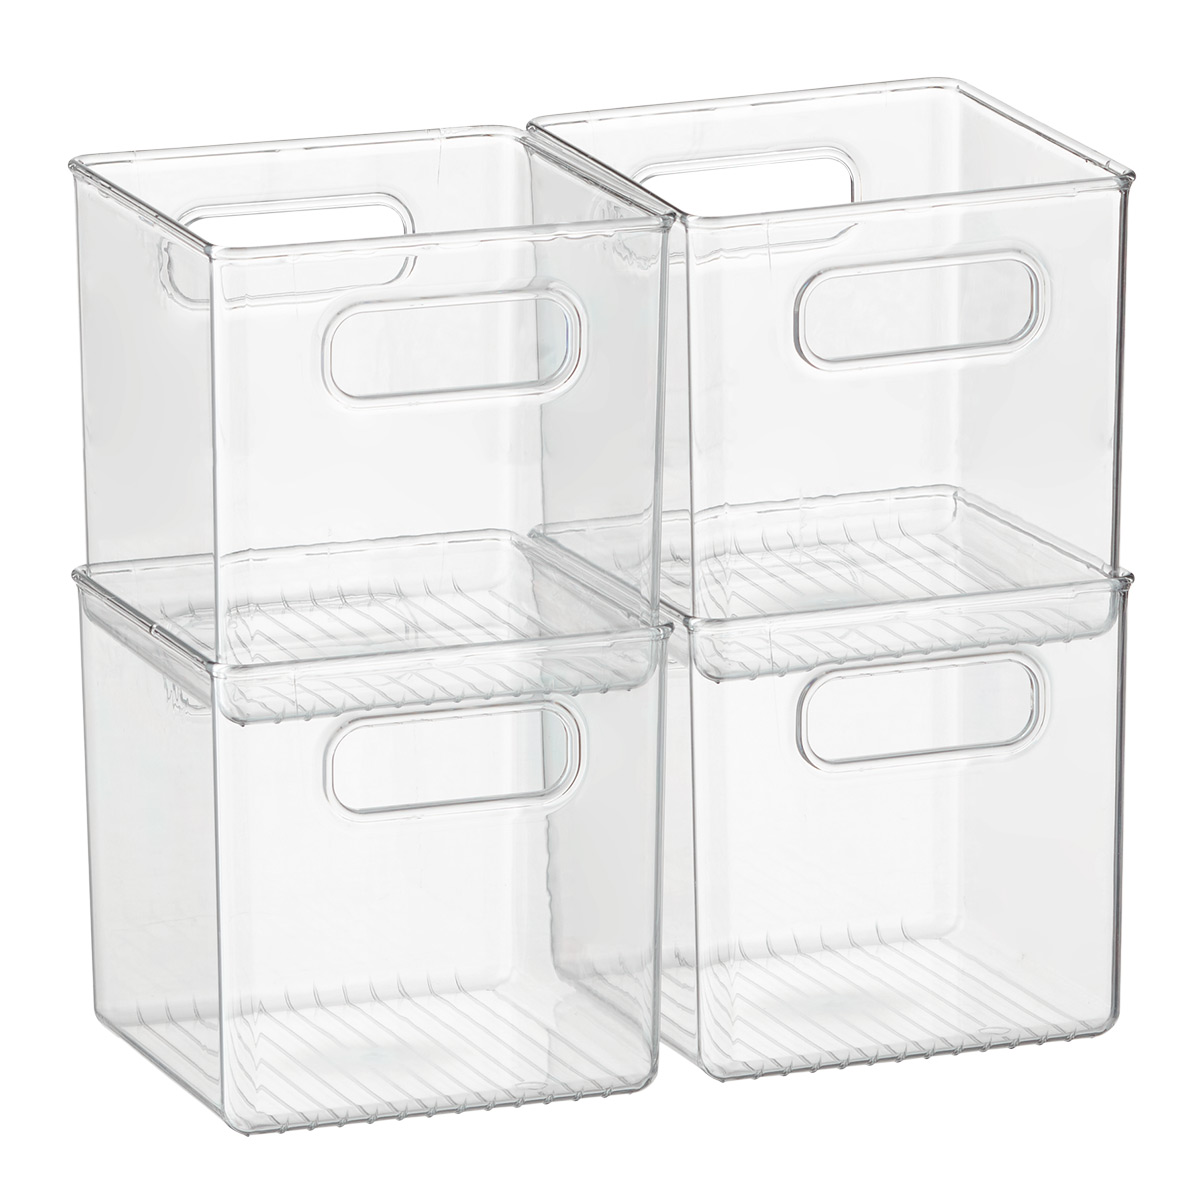 Case of 4 Linus Small Pantry Cube Clear